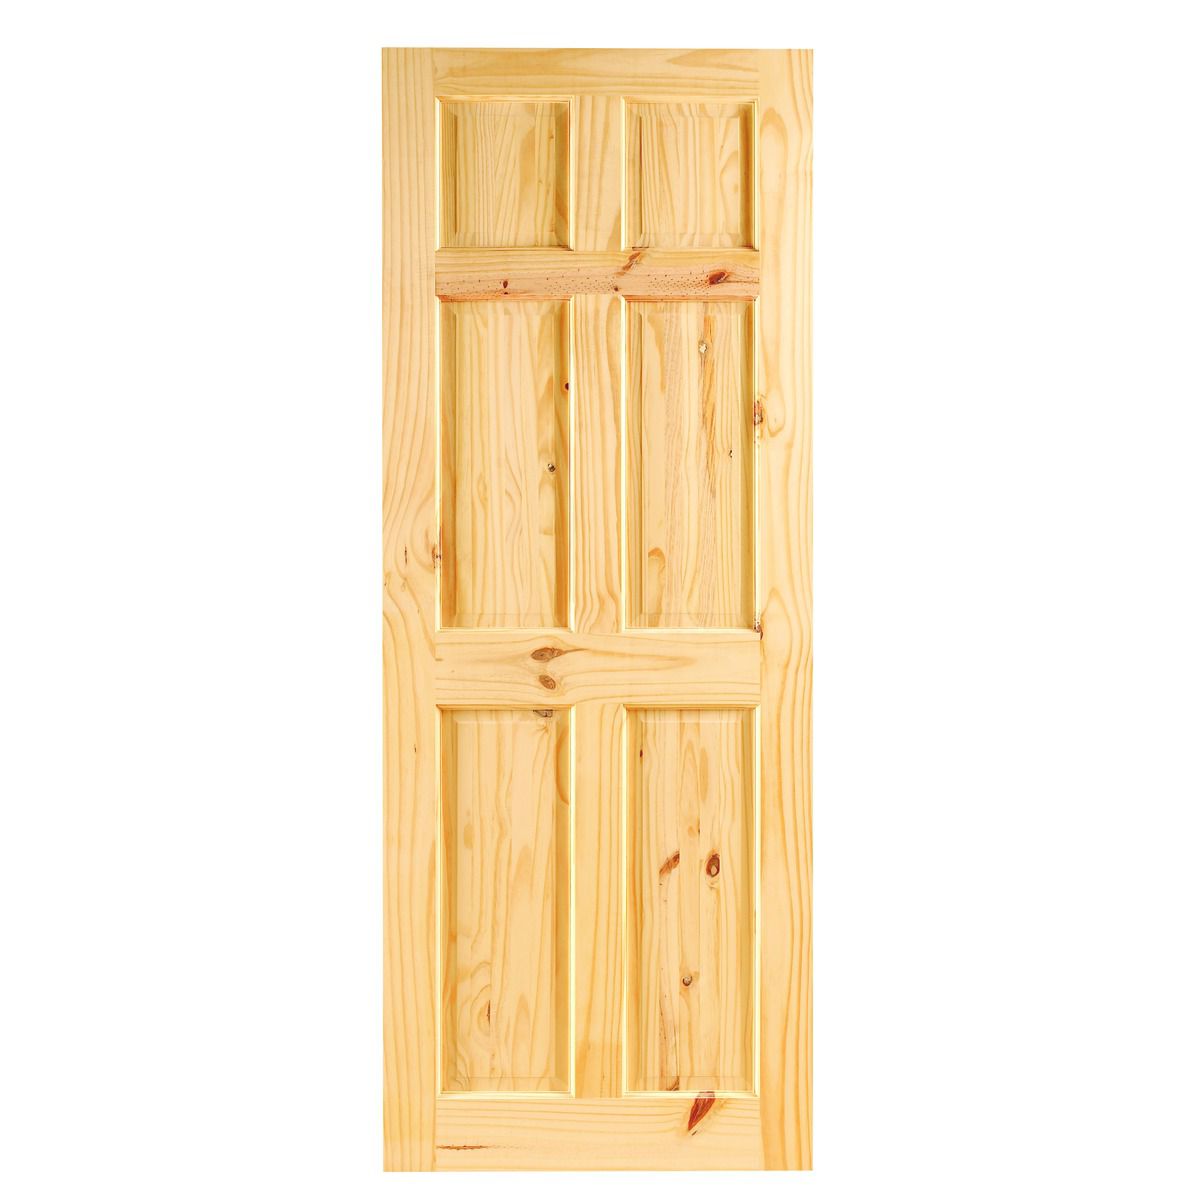 Image of Wickes Lincoln Knotty Pine 6 Panel Internal Door - 1981 x 686mm